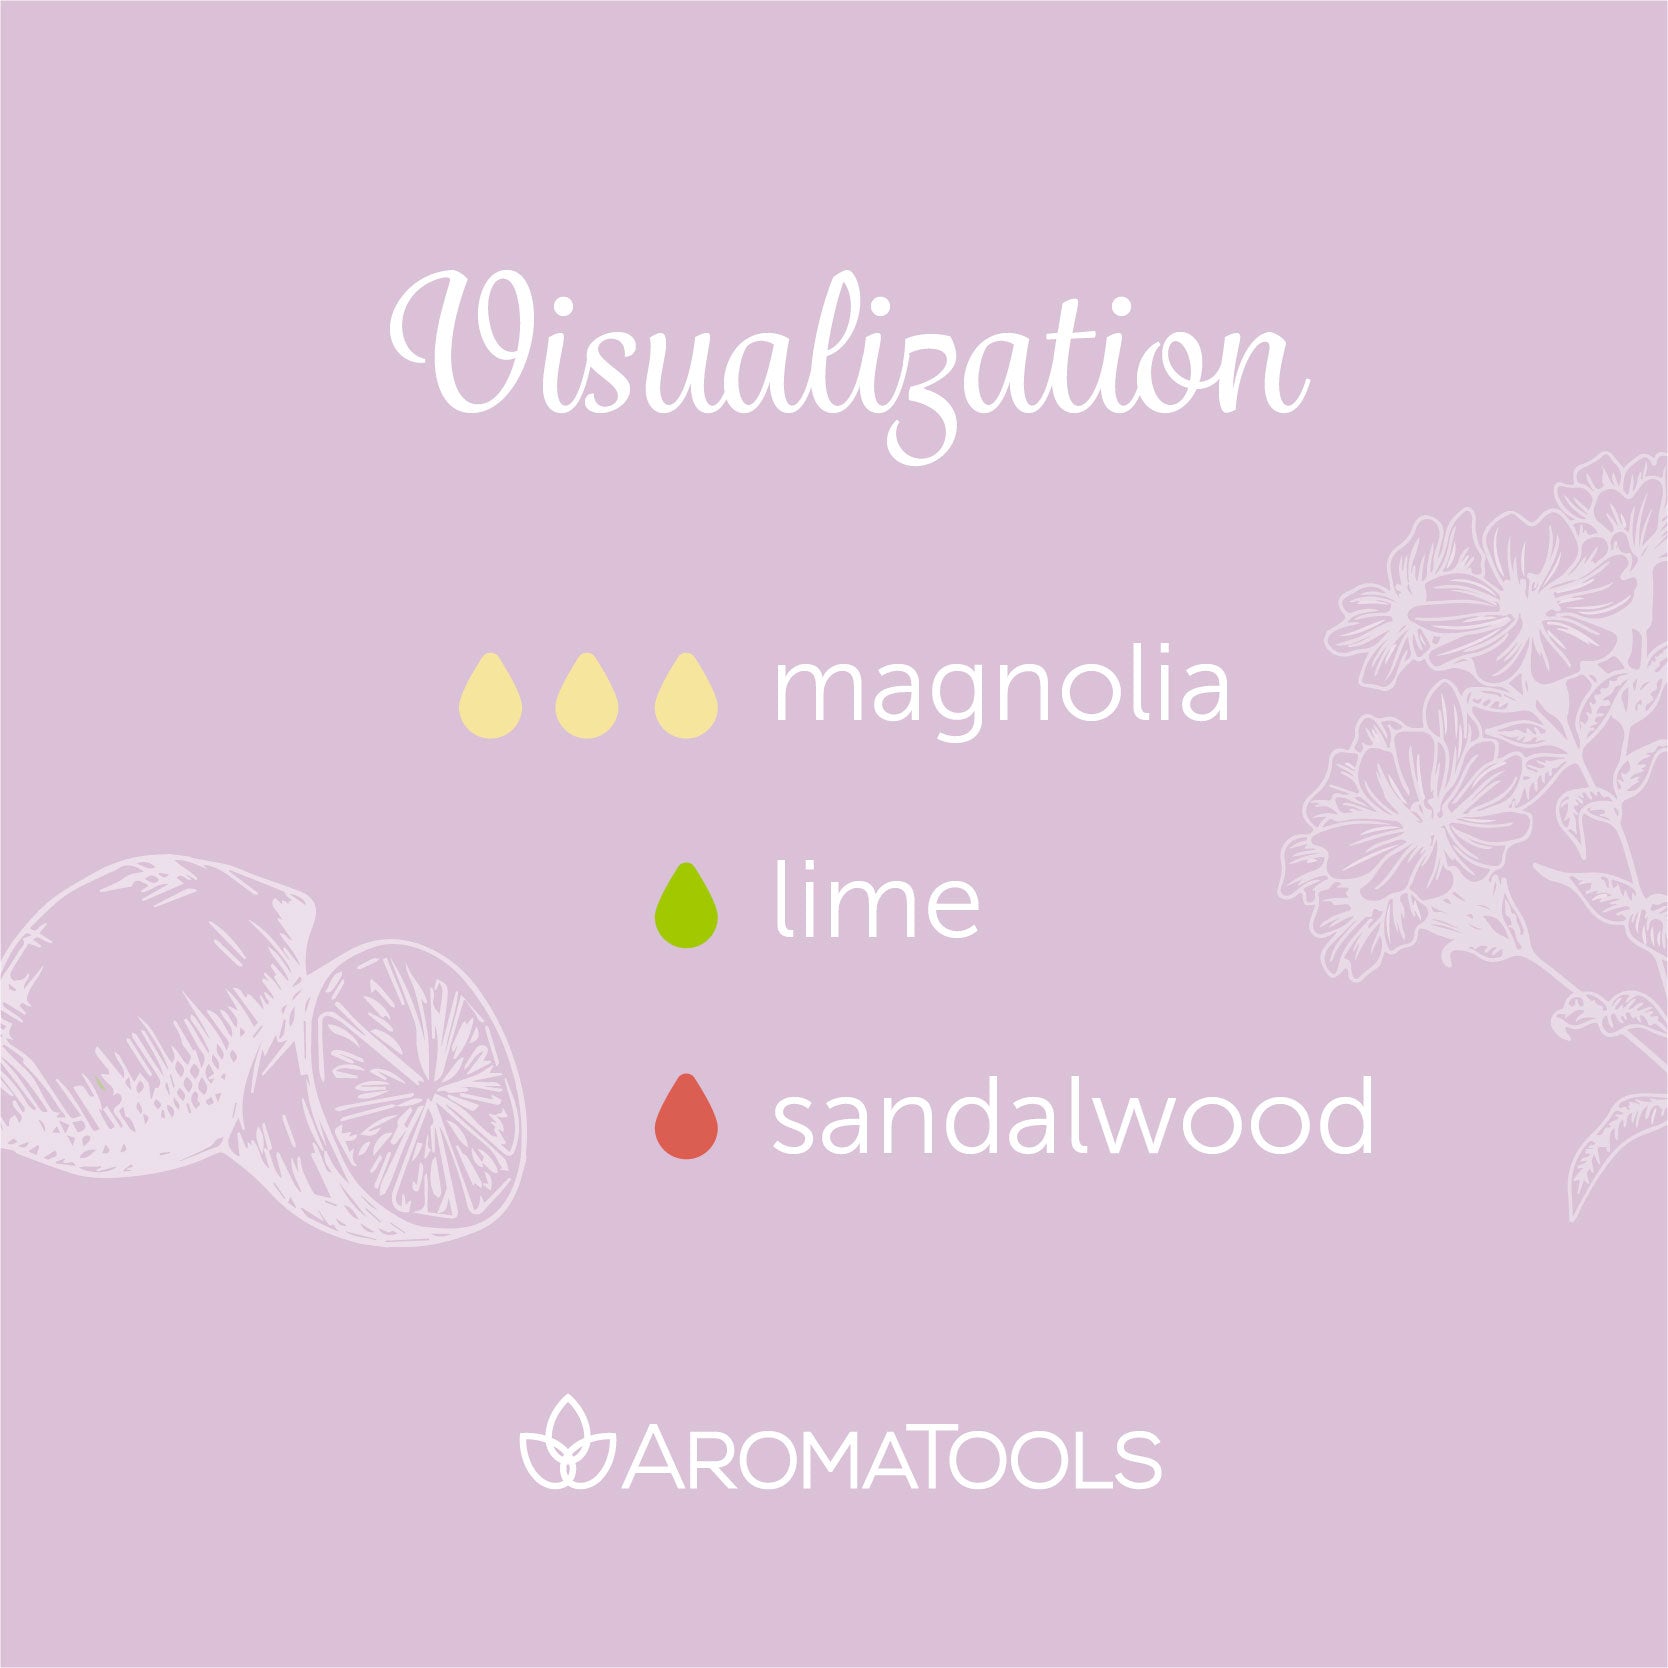 "Visualization" Diffuser Blend. Features magnolia, lime and sandalwood essential oils.